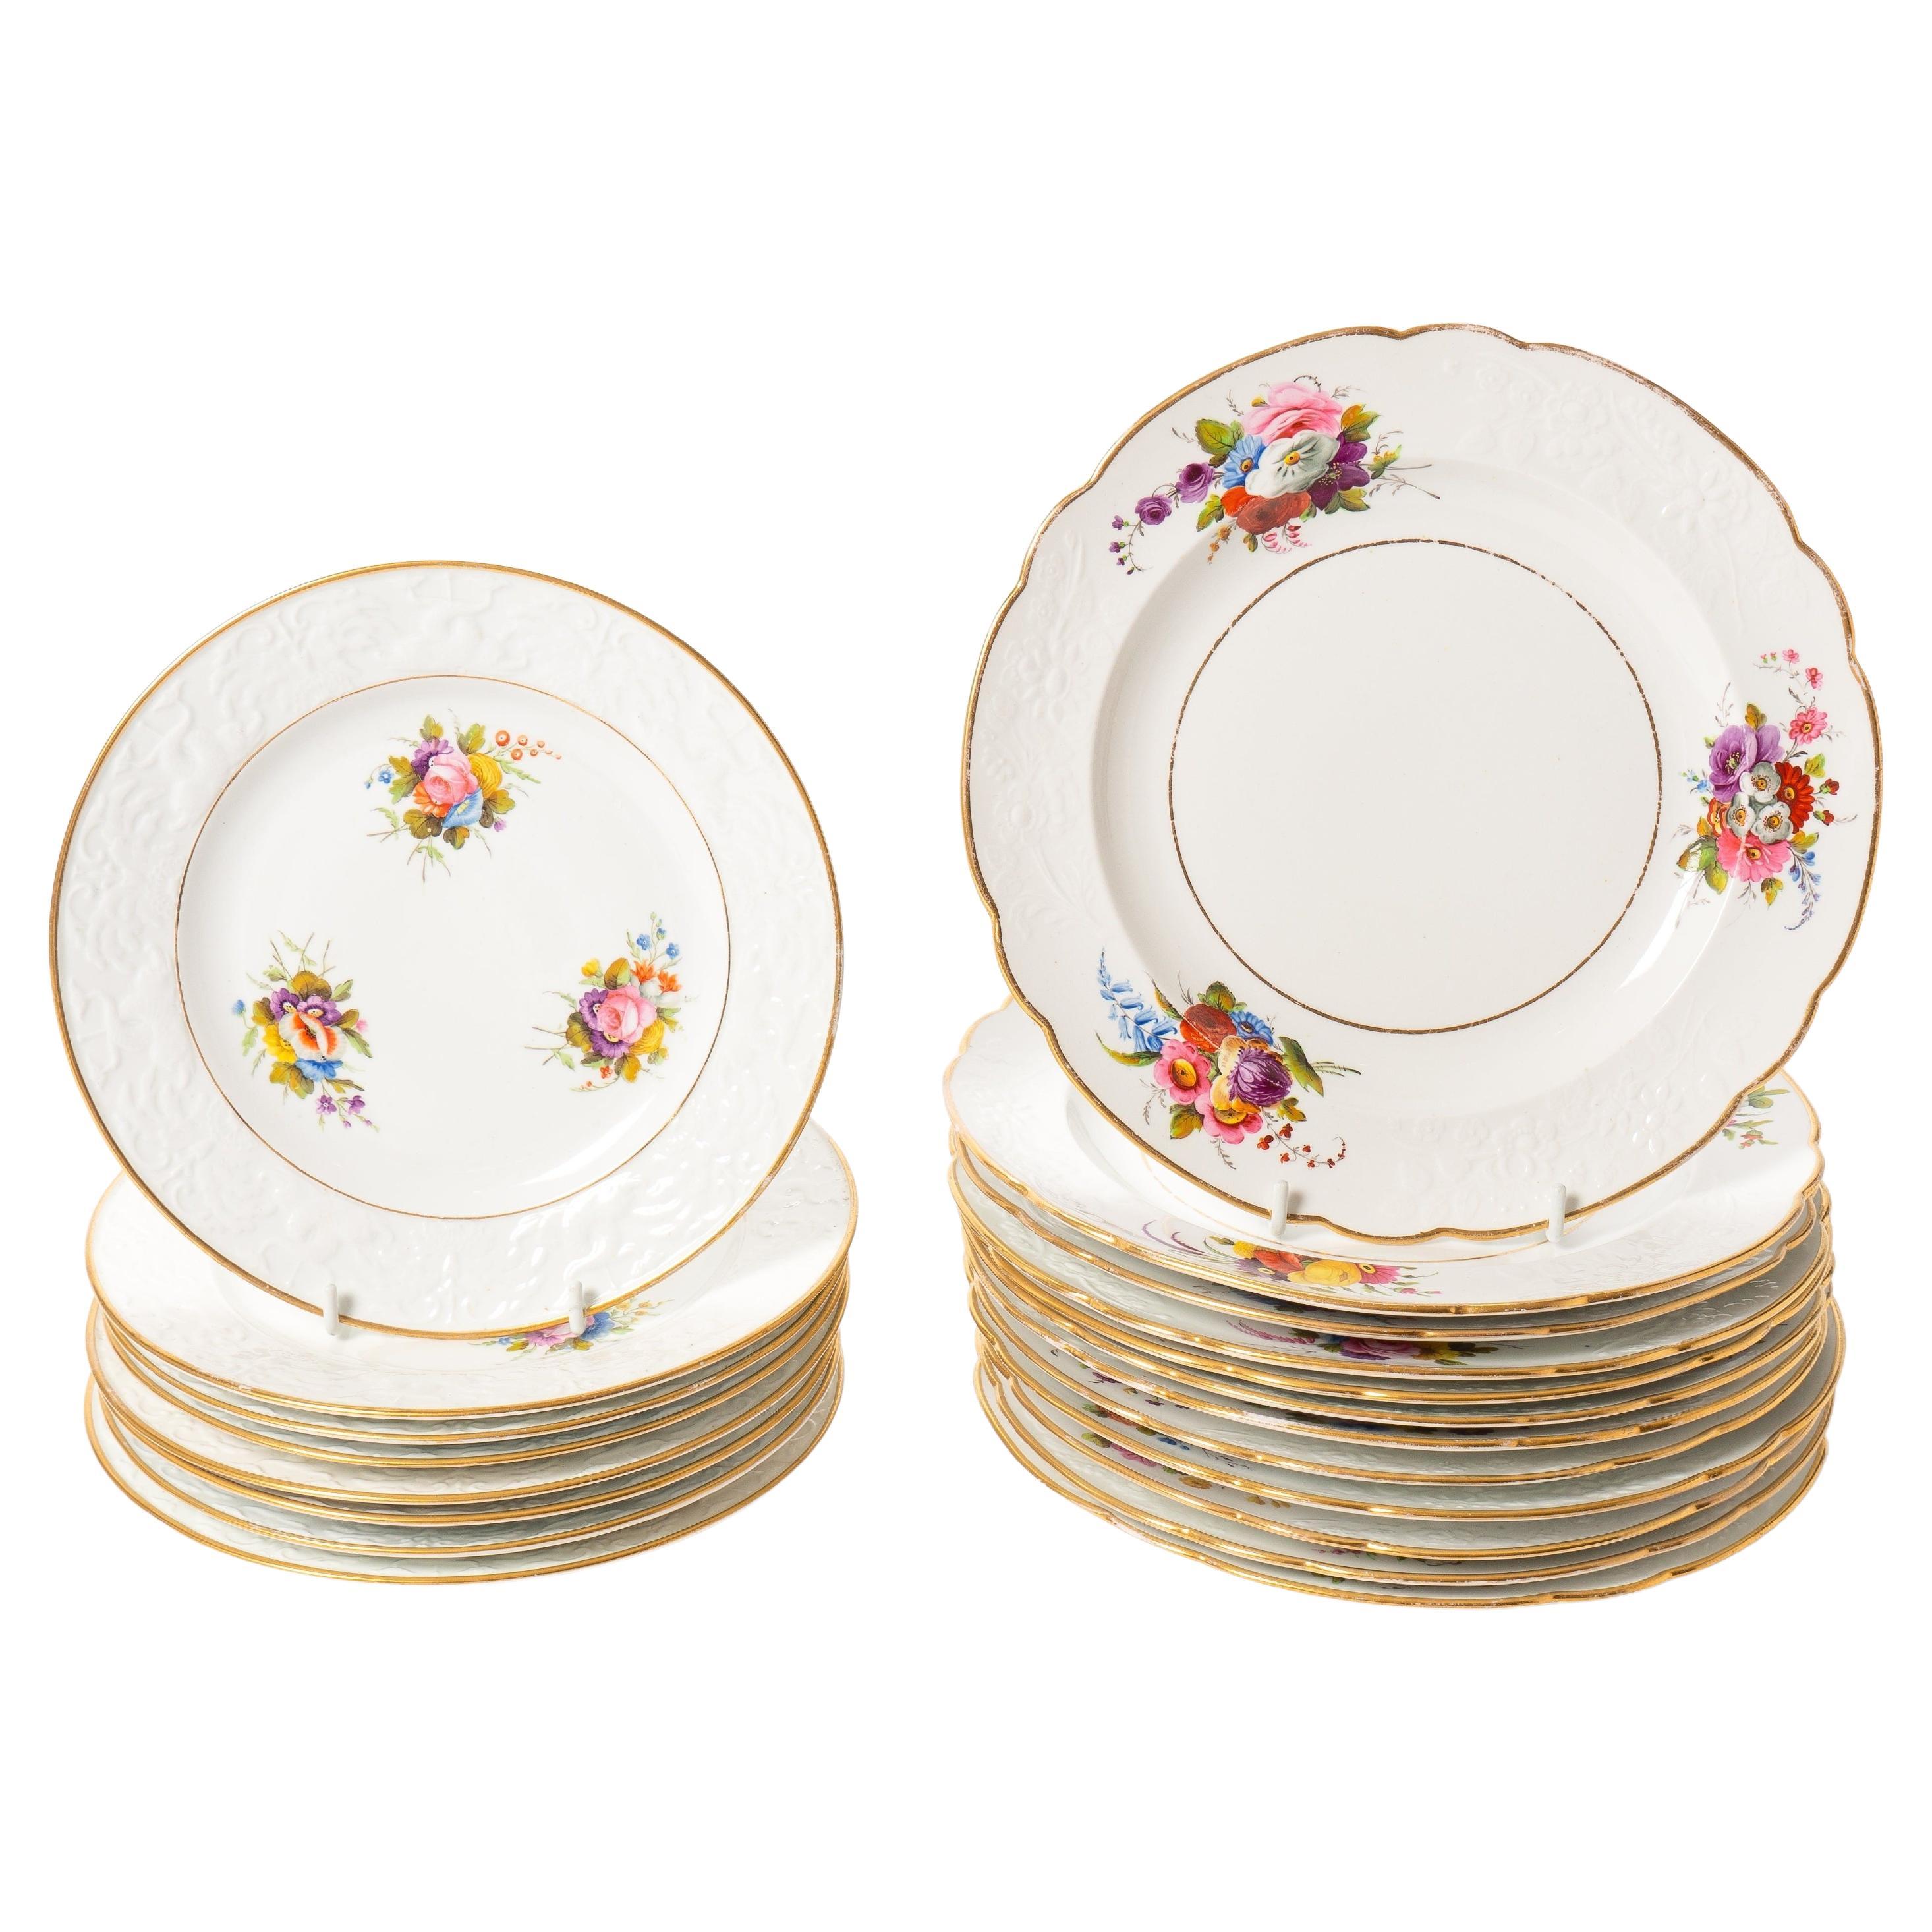 Set of 12 Dinner Plates and 8 Dessert Plates in Bone China by Spode